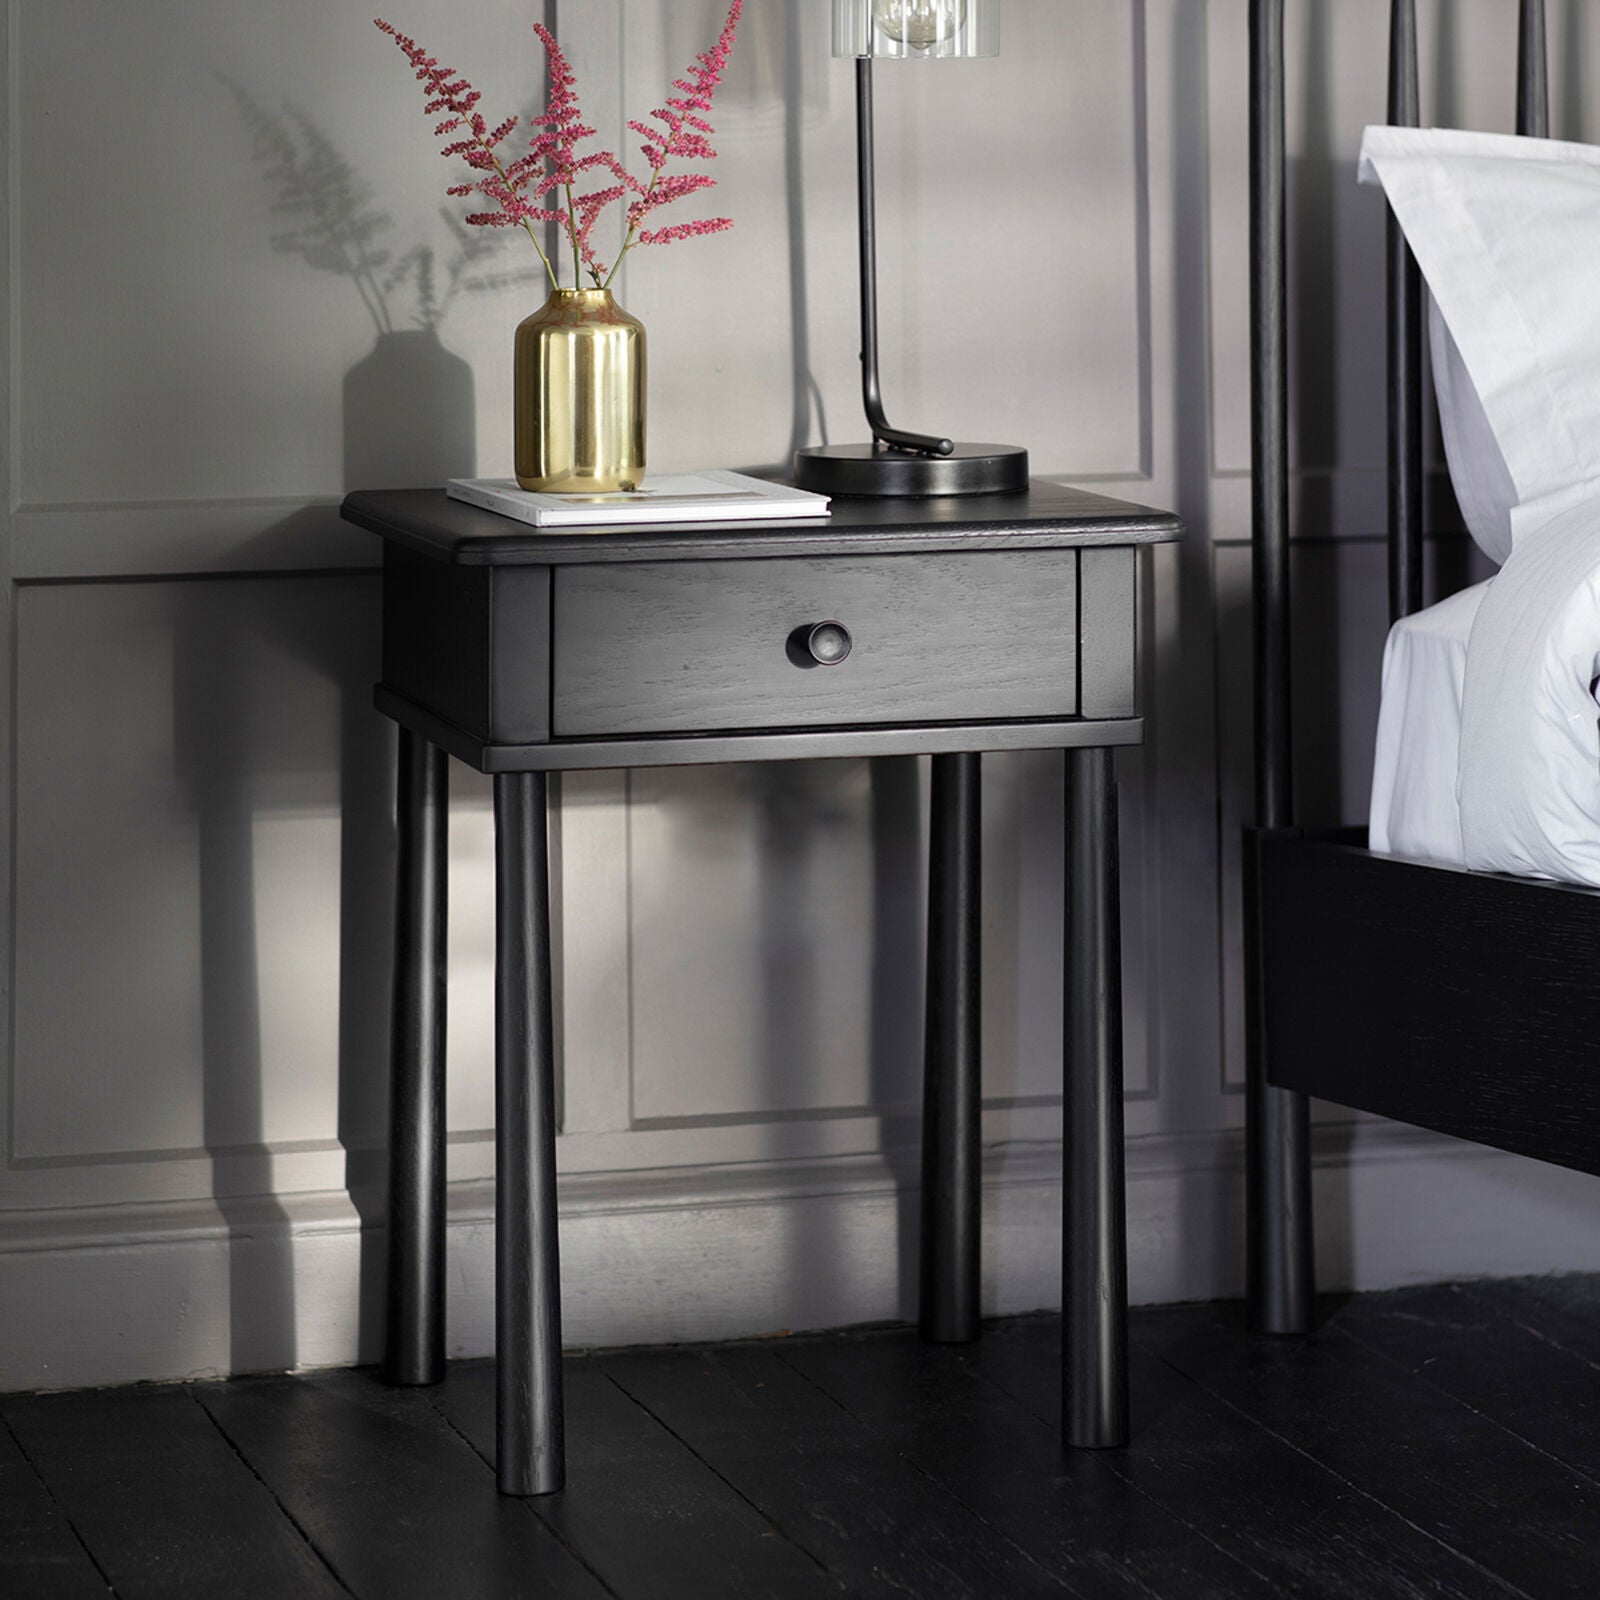 Axel Nordic style black oak bedside table with pull out drawer | MalletandPlane.com